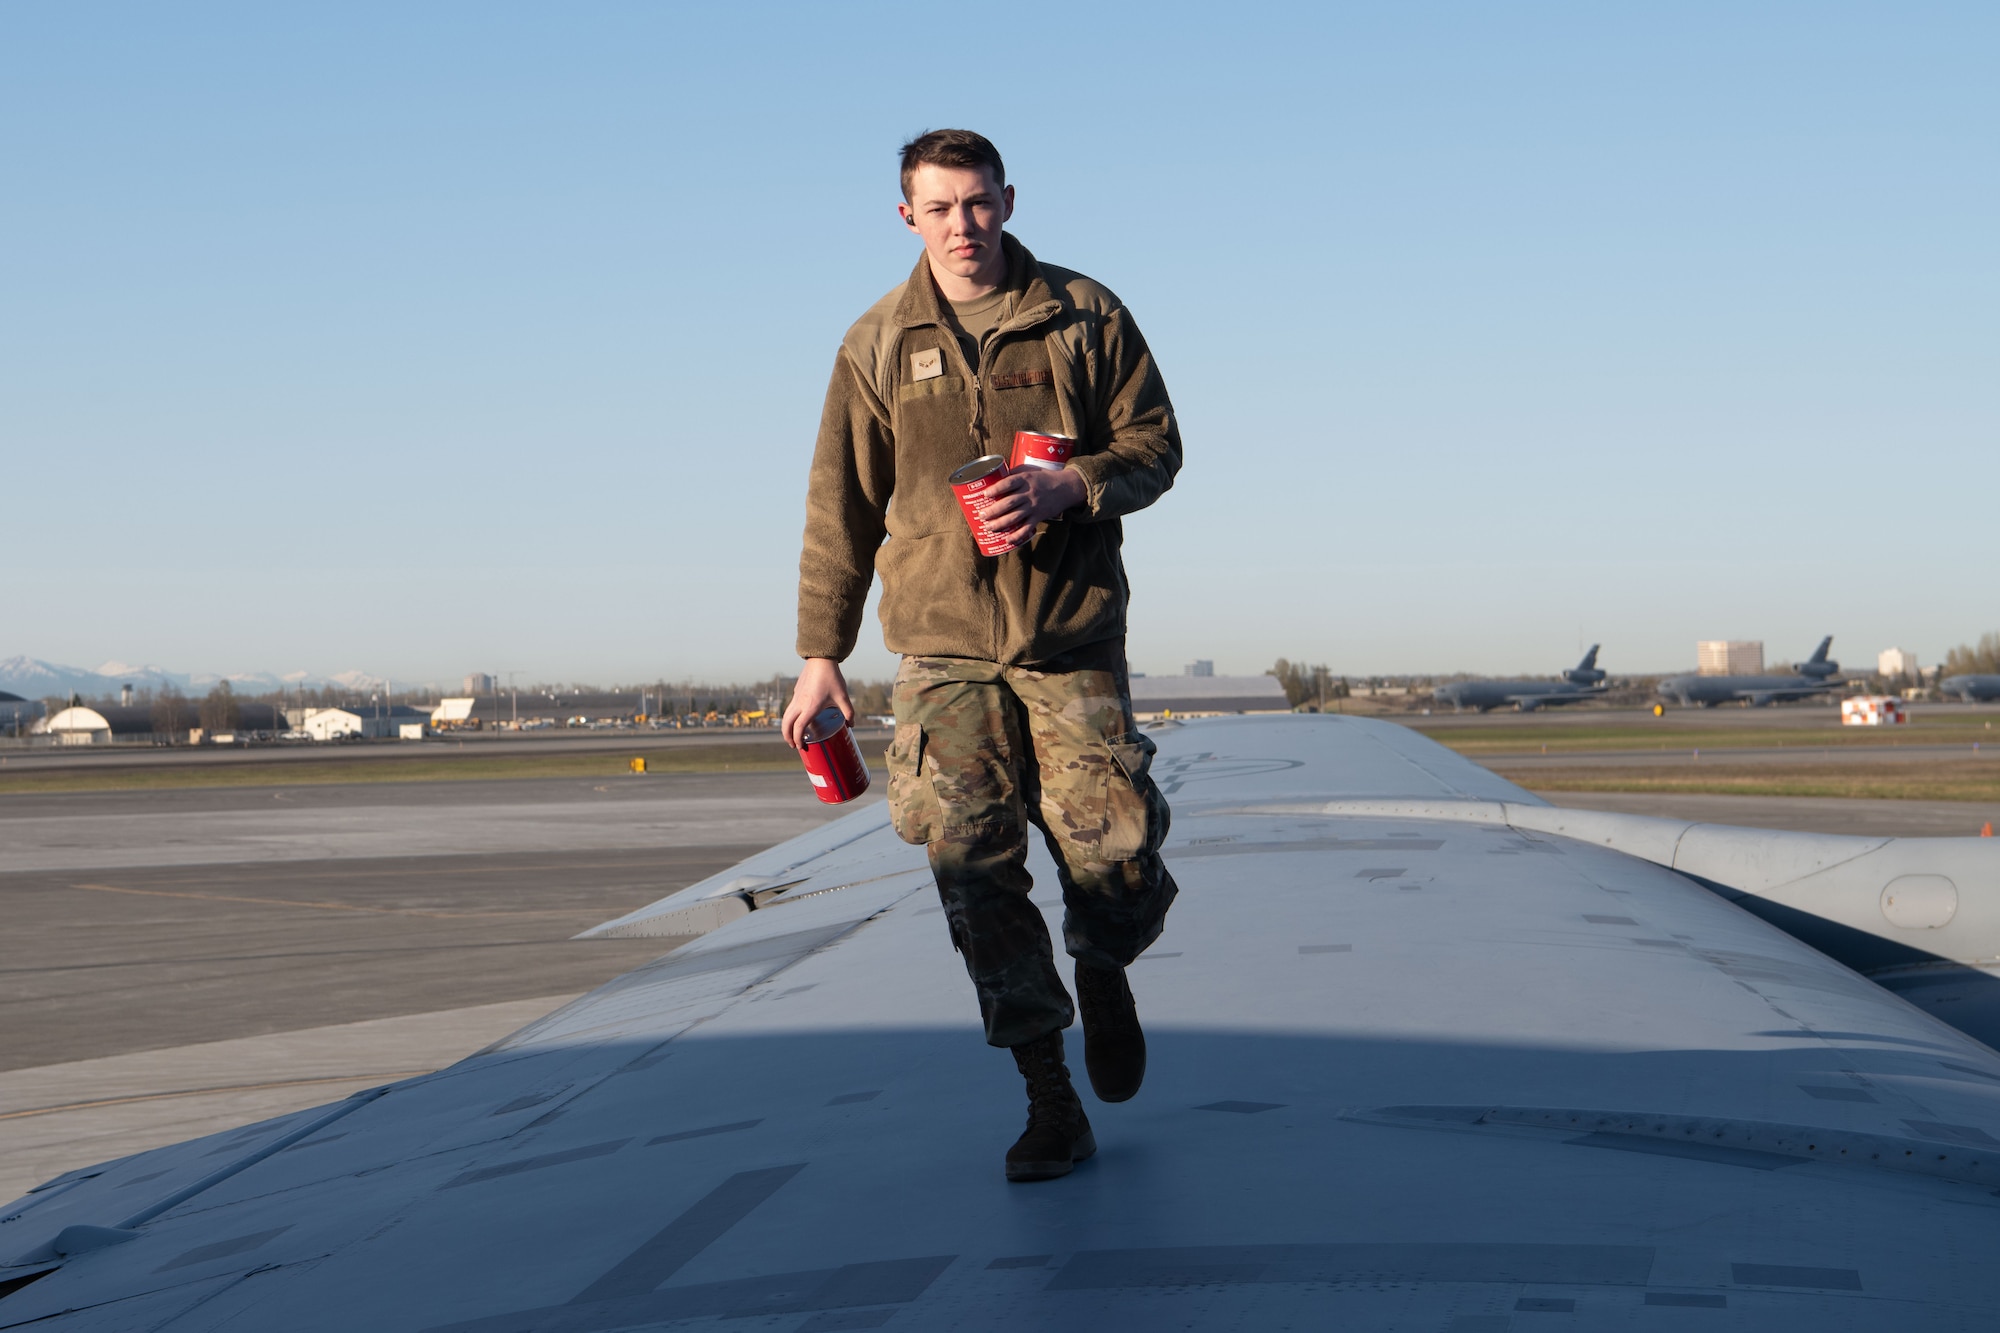 A photo of a man walking on an aircraft wing